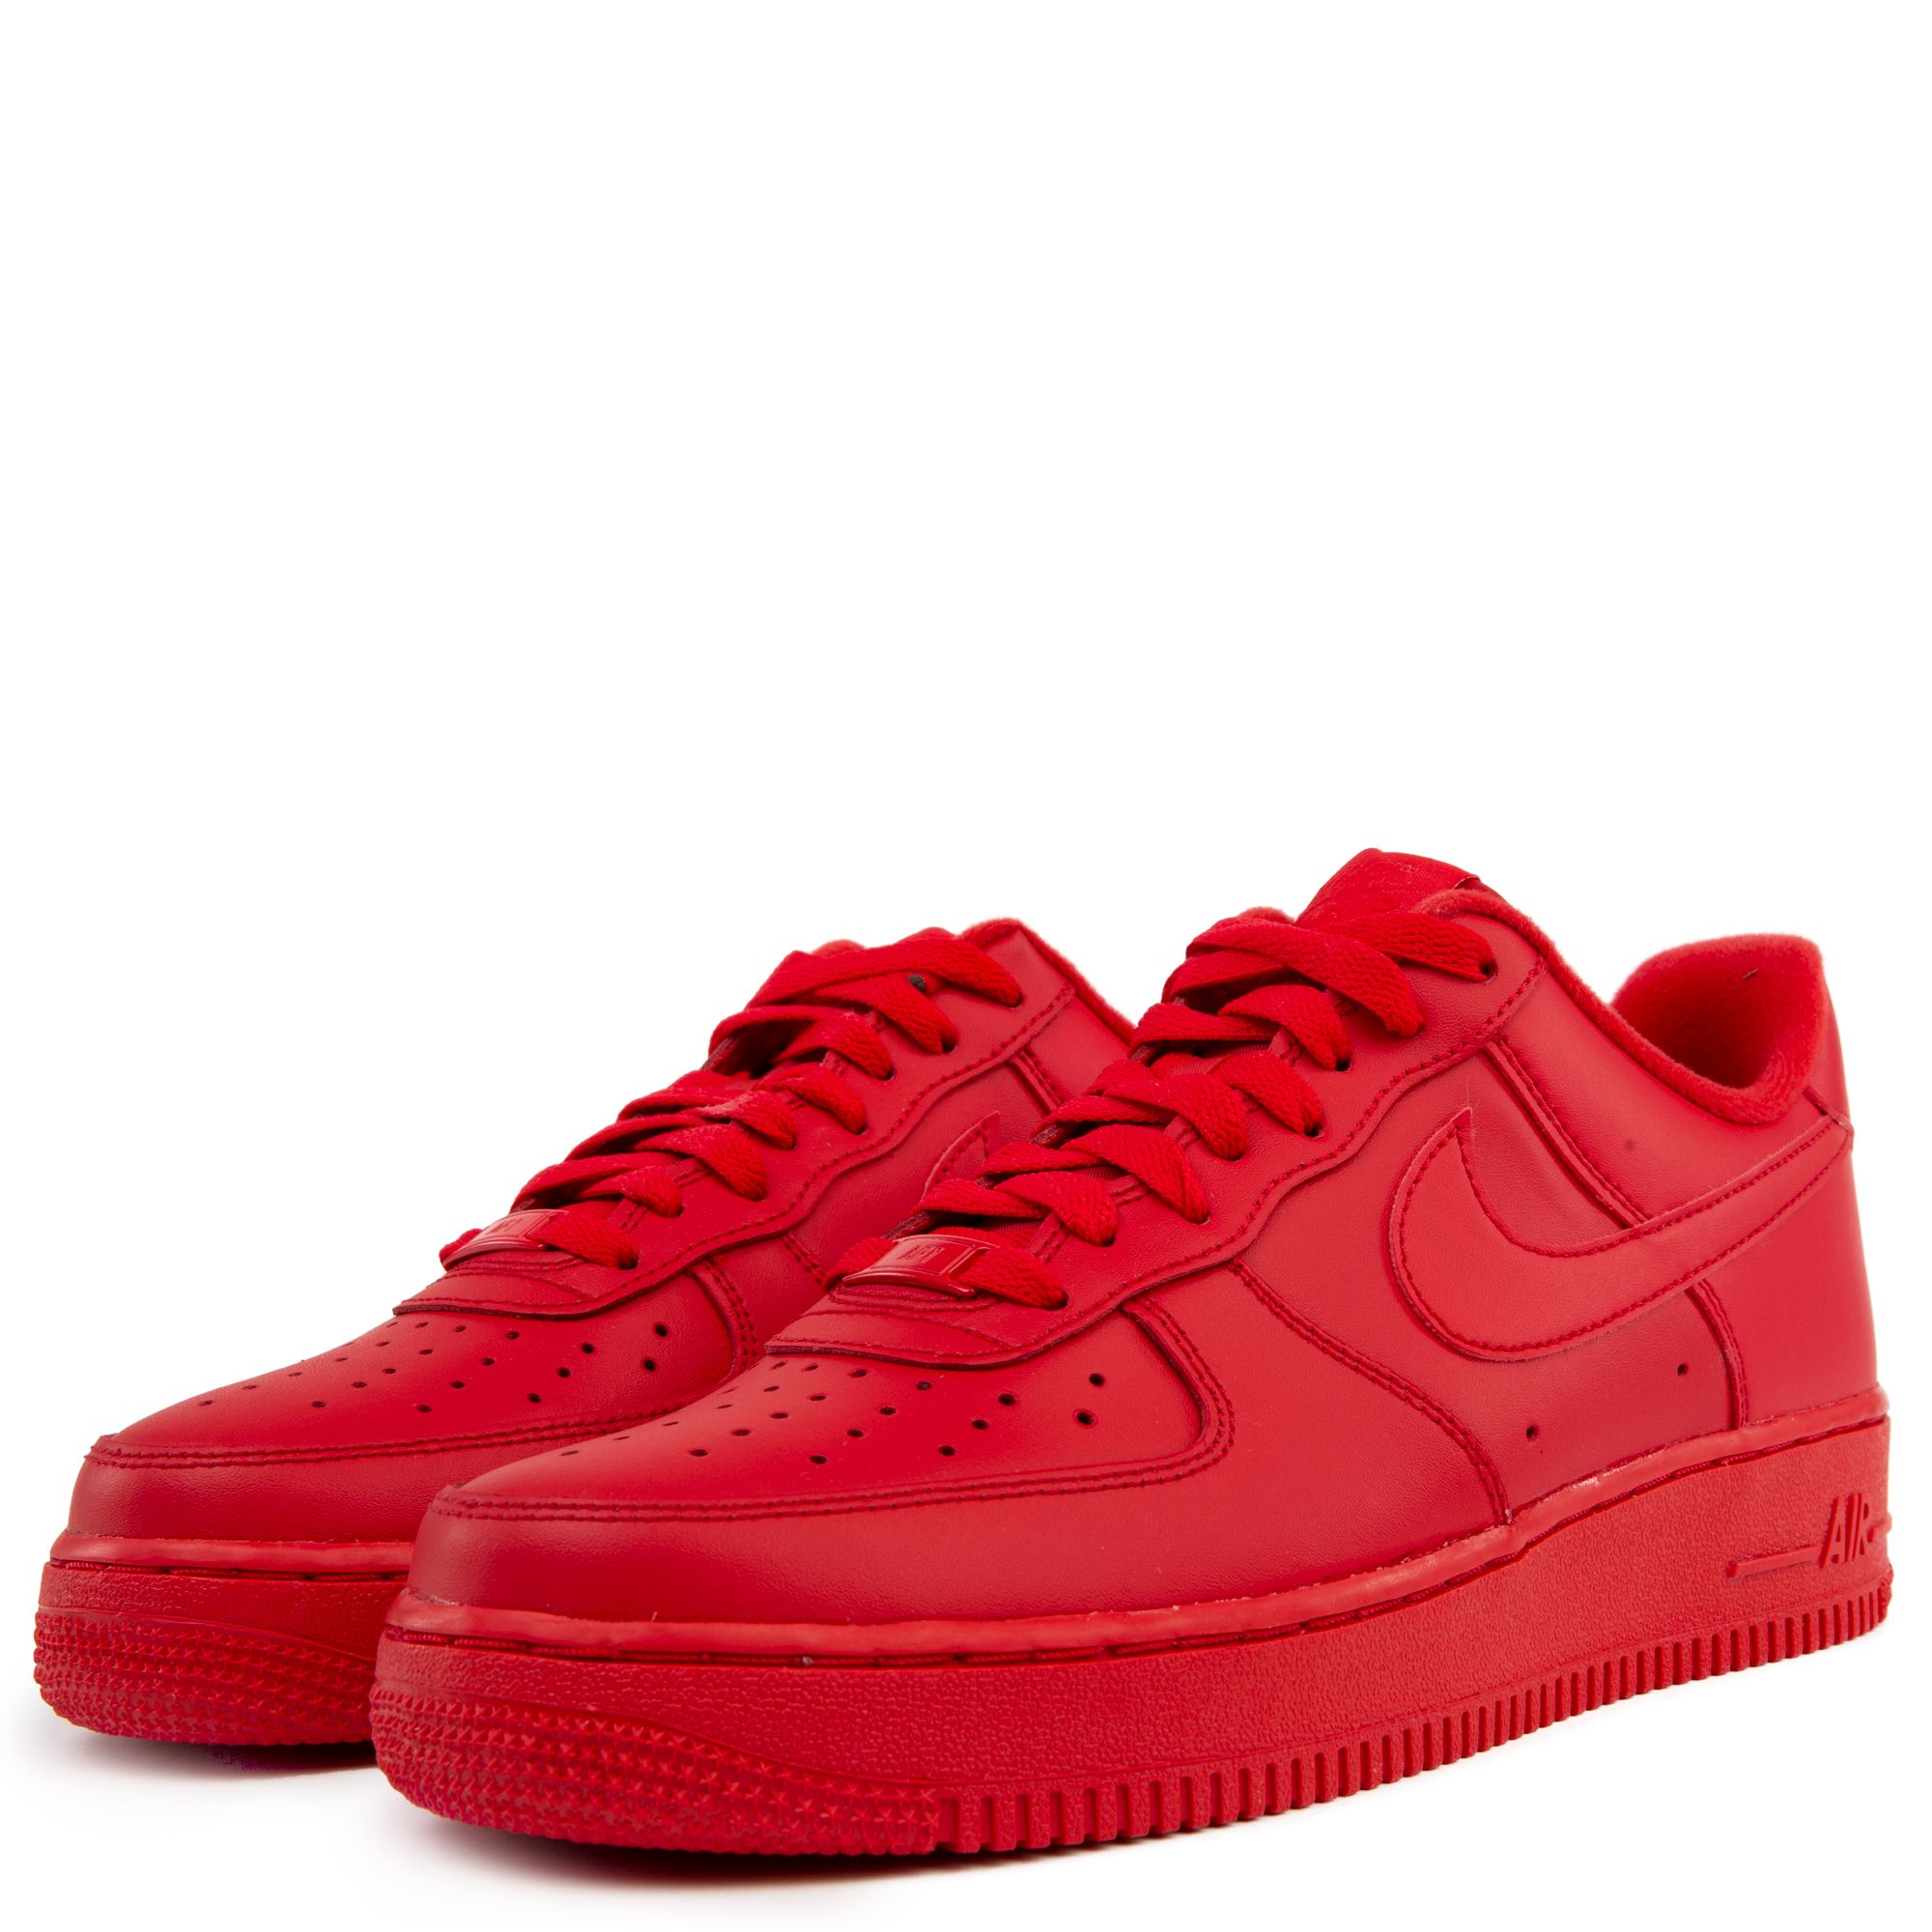 Nike Air Force 1 Low '07 LV8 1' Size US6.5 'Triple Red'  Mens